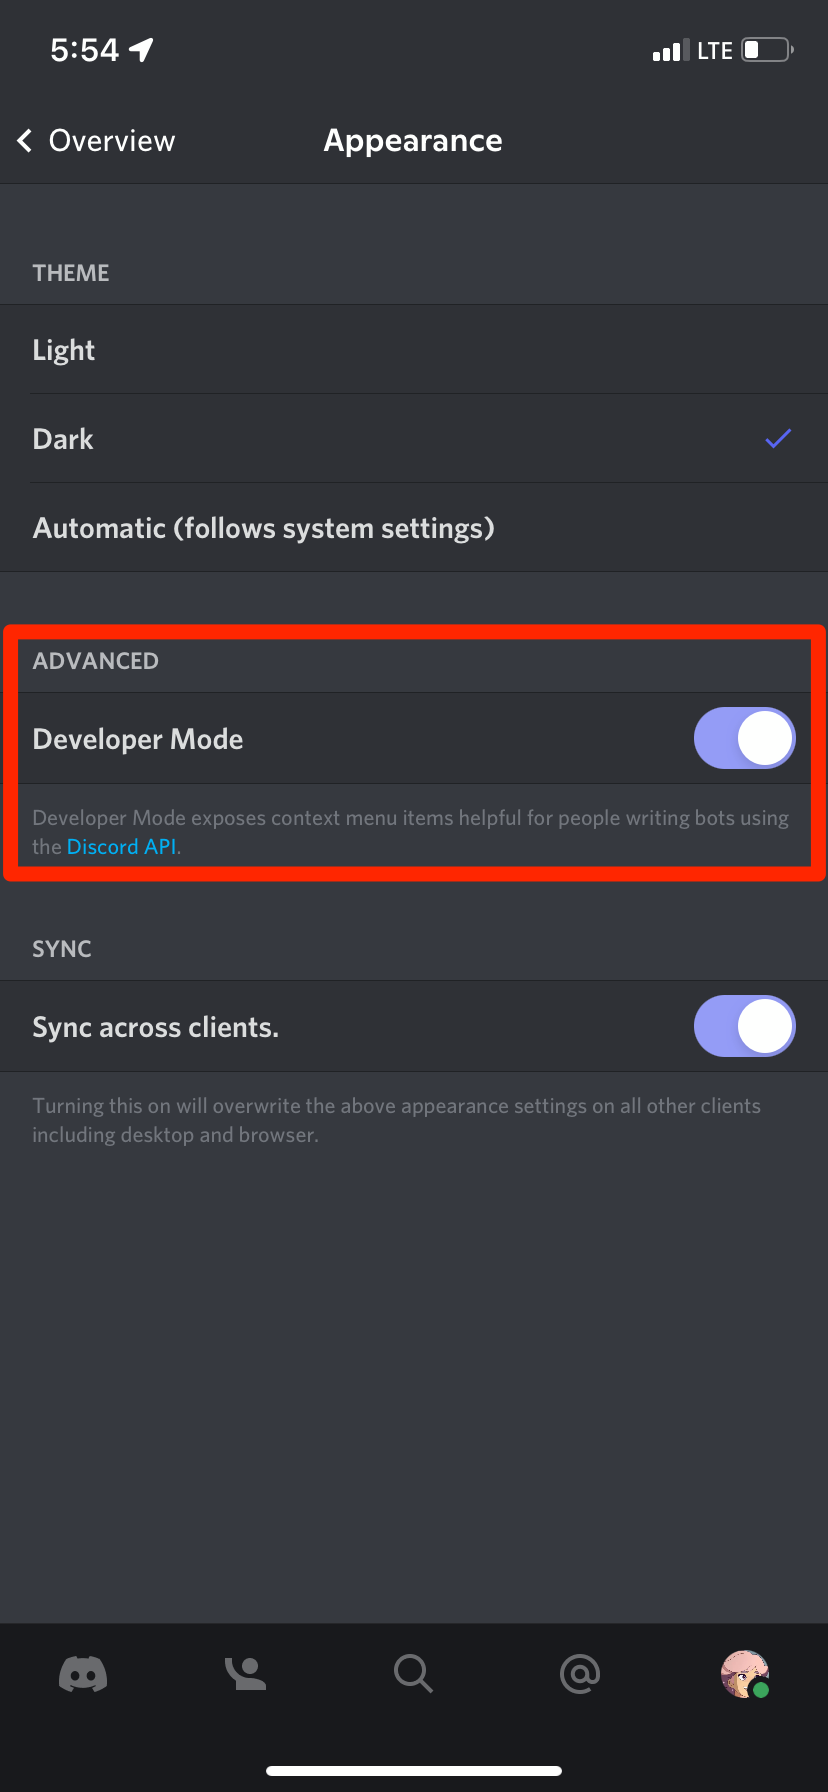 The Appearance menu in the Discord iPhone app, with the option to enable developer mode highlighted.